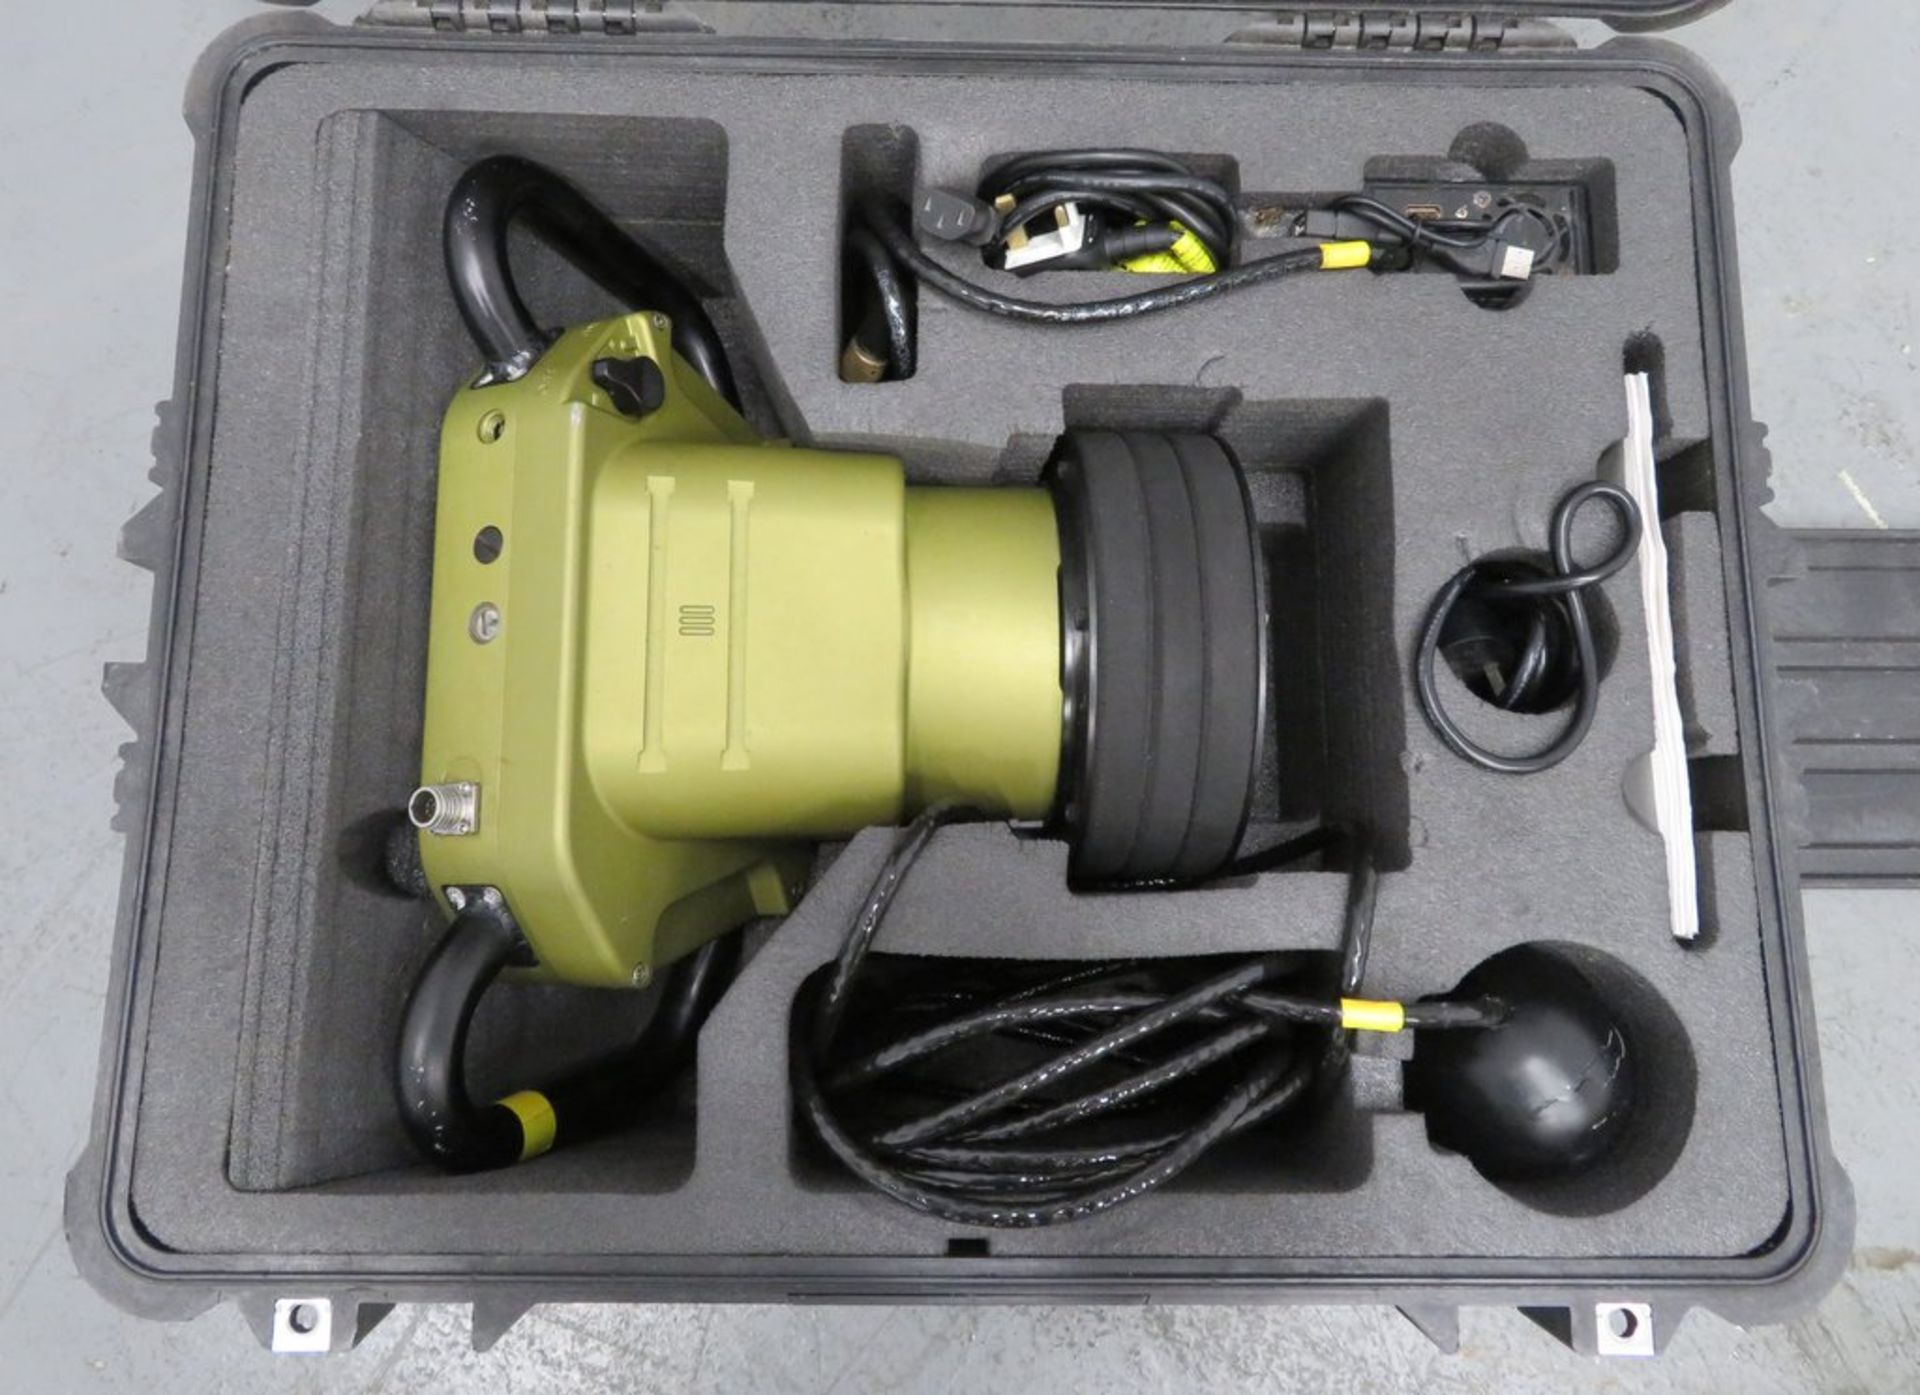 Oceana Technologies DNS 300 Fully integrated hand held sonar device. - Image 2 of 12